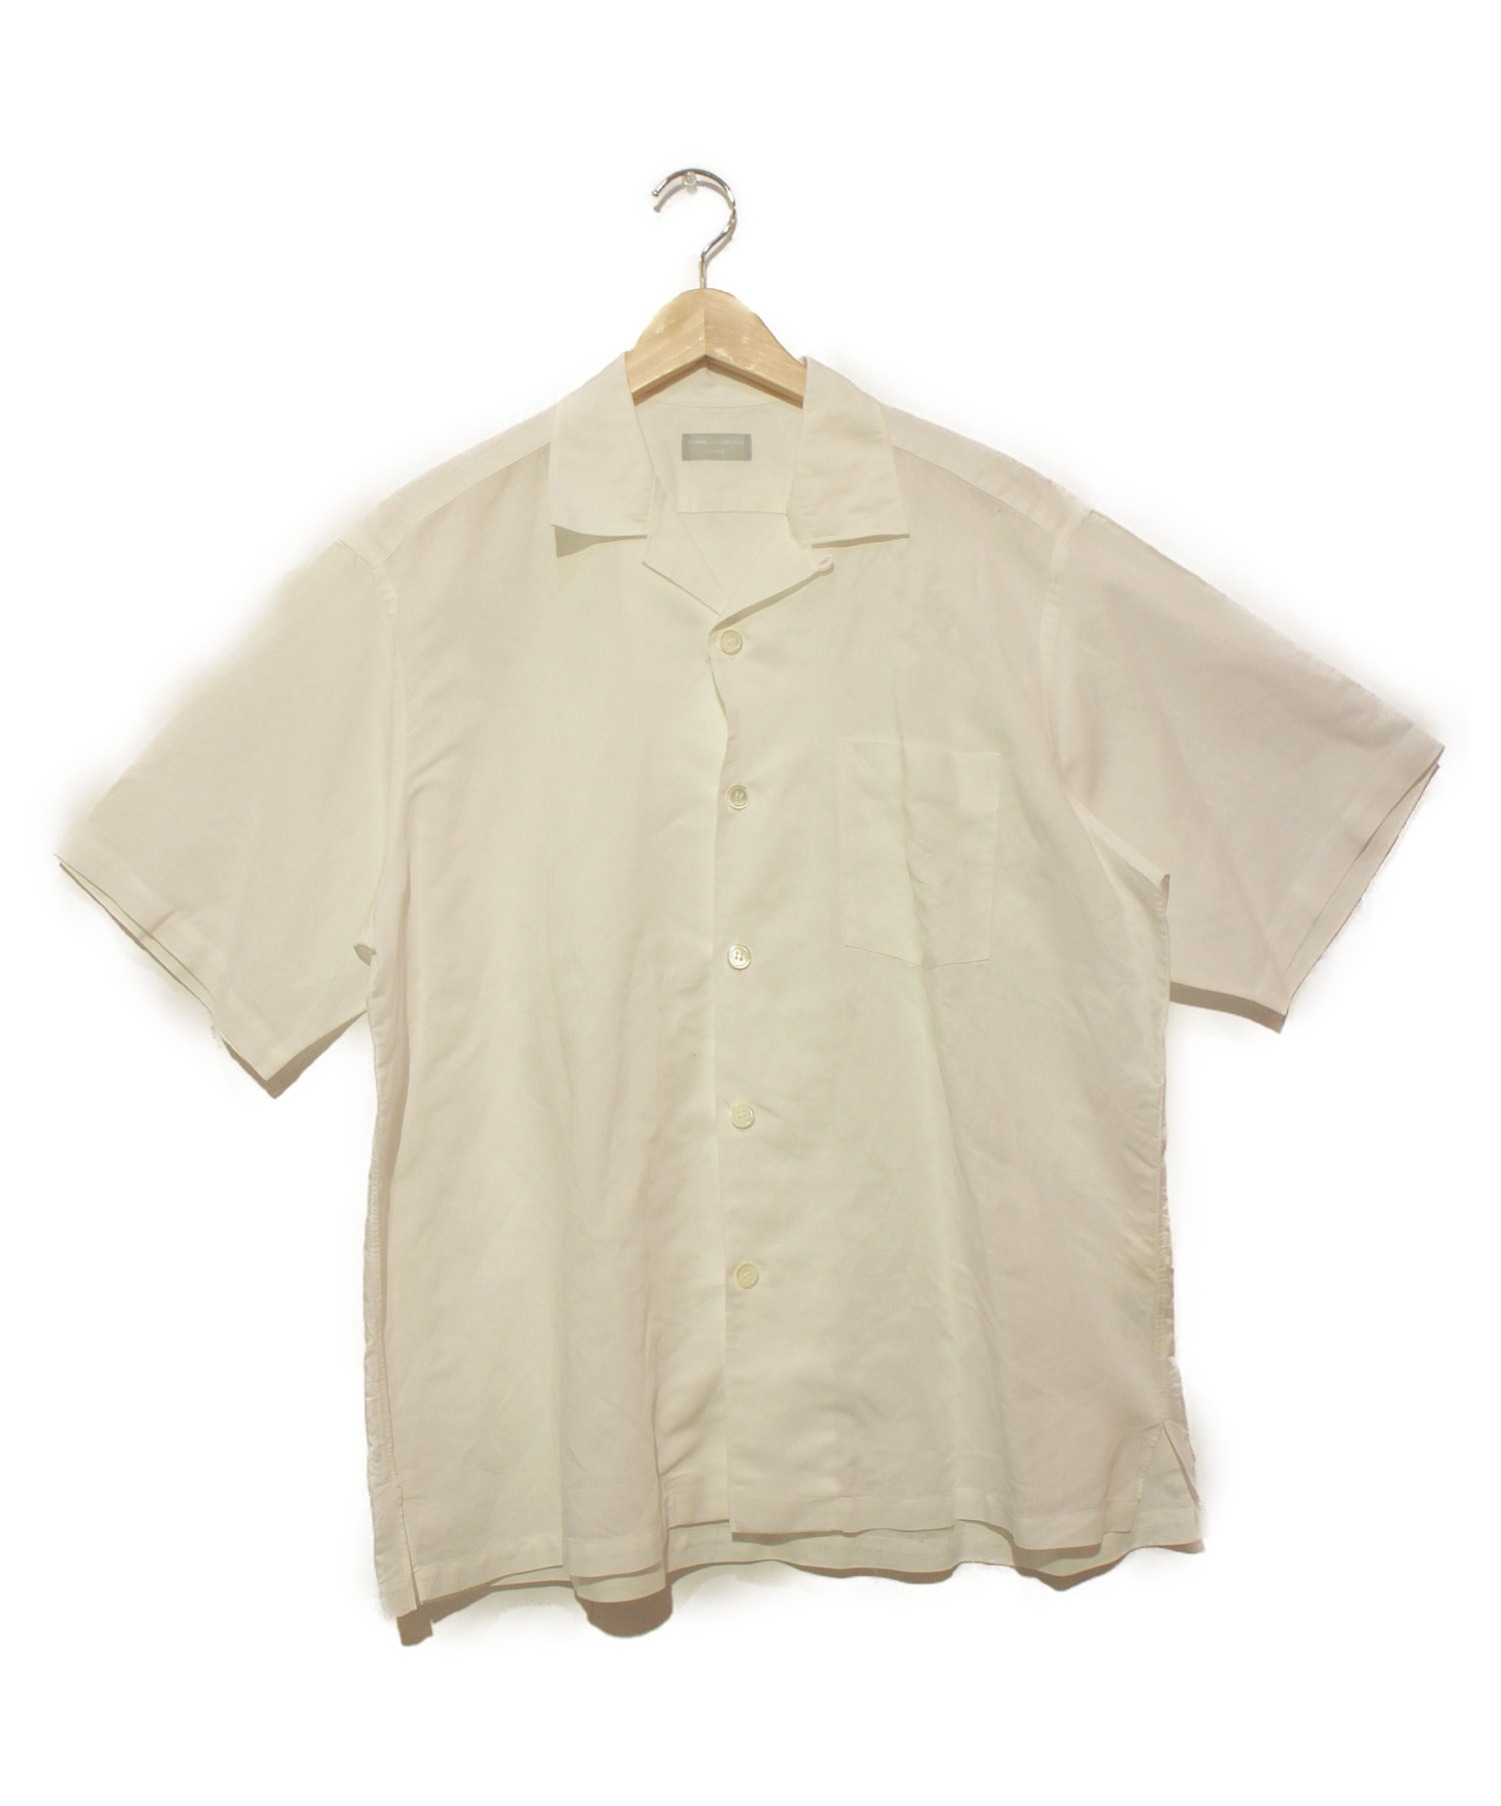 COMME des GARCONS HOMME オープンカラーシャツ | kinderpartys.at